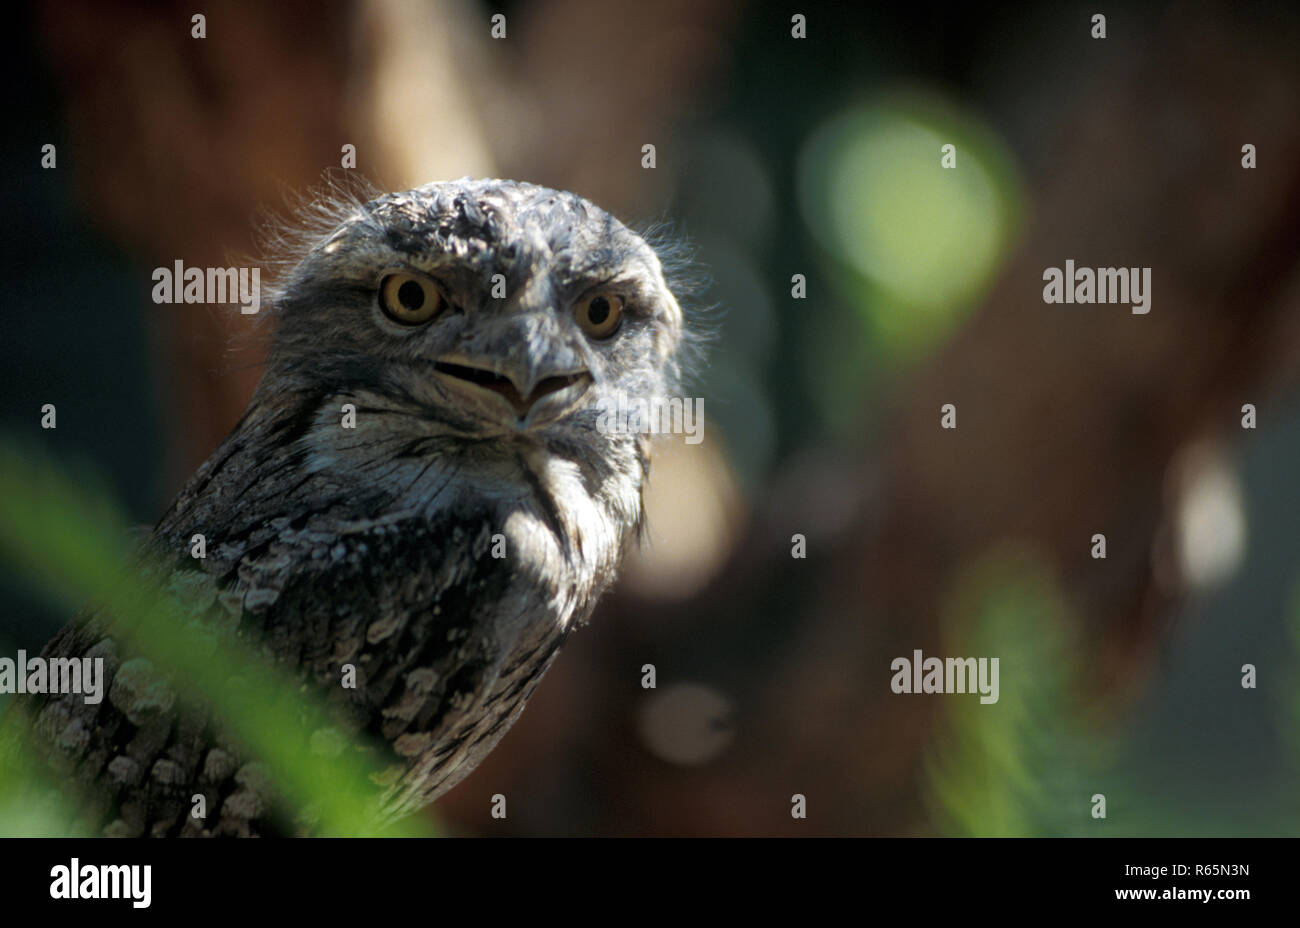 The Tawny frogmouth (Podargus strigoides) is a species of frogmouth native to and found throughout the Australian mainland and Tasmania. Stock Photo